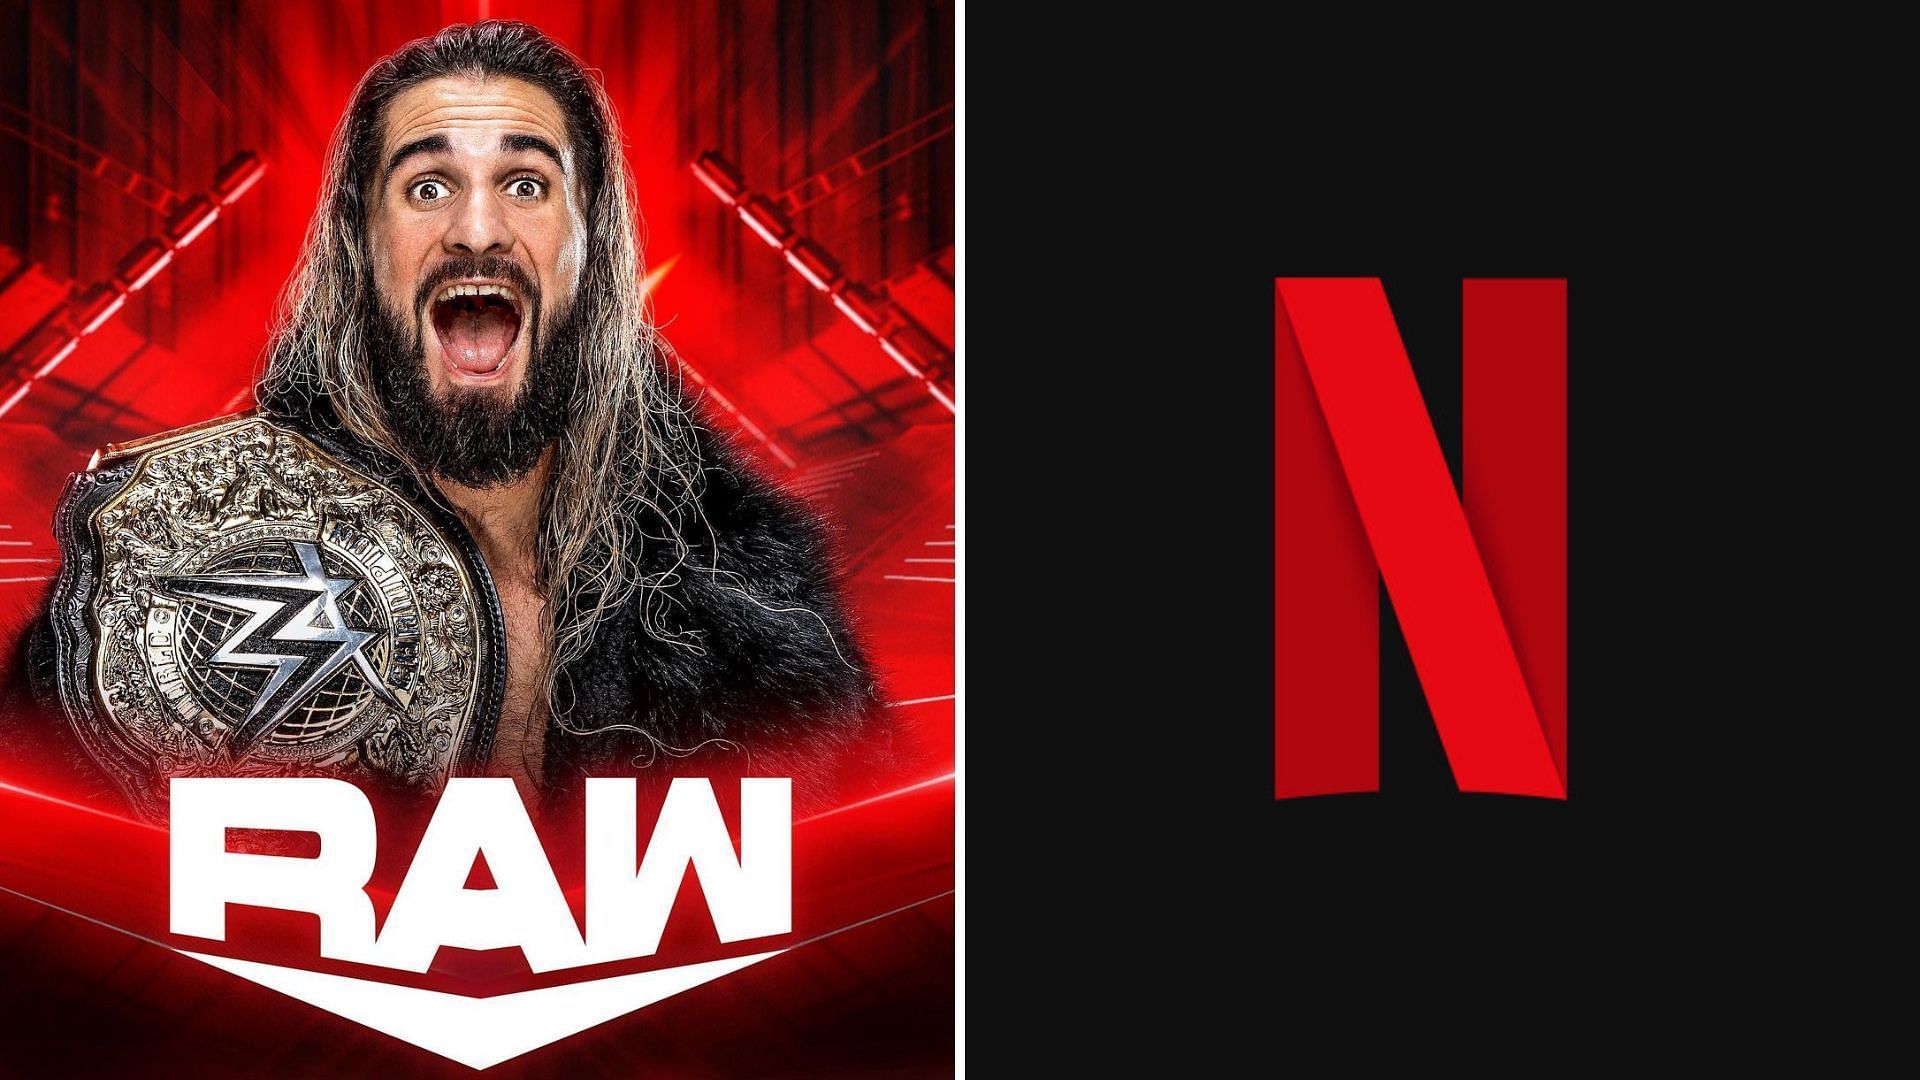 WWE Raw is all set to move to Netflix